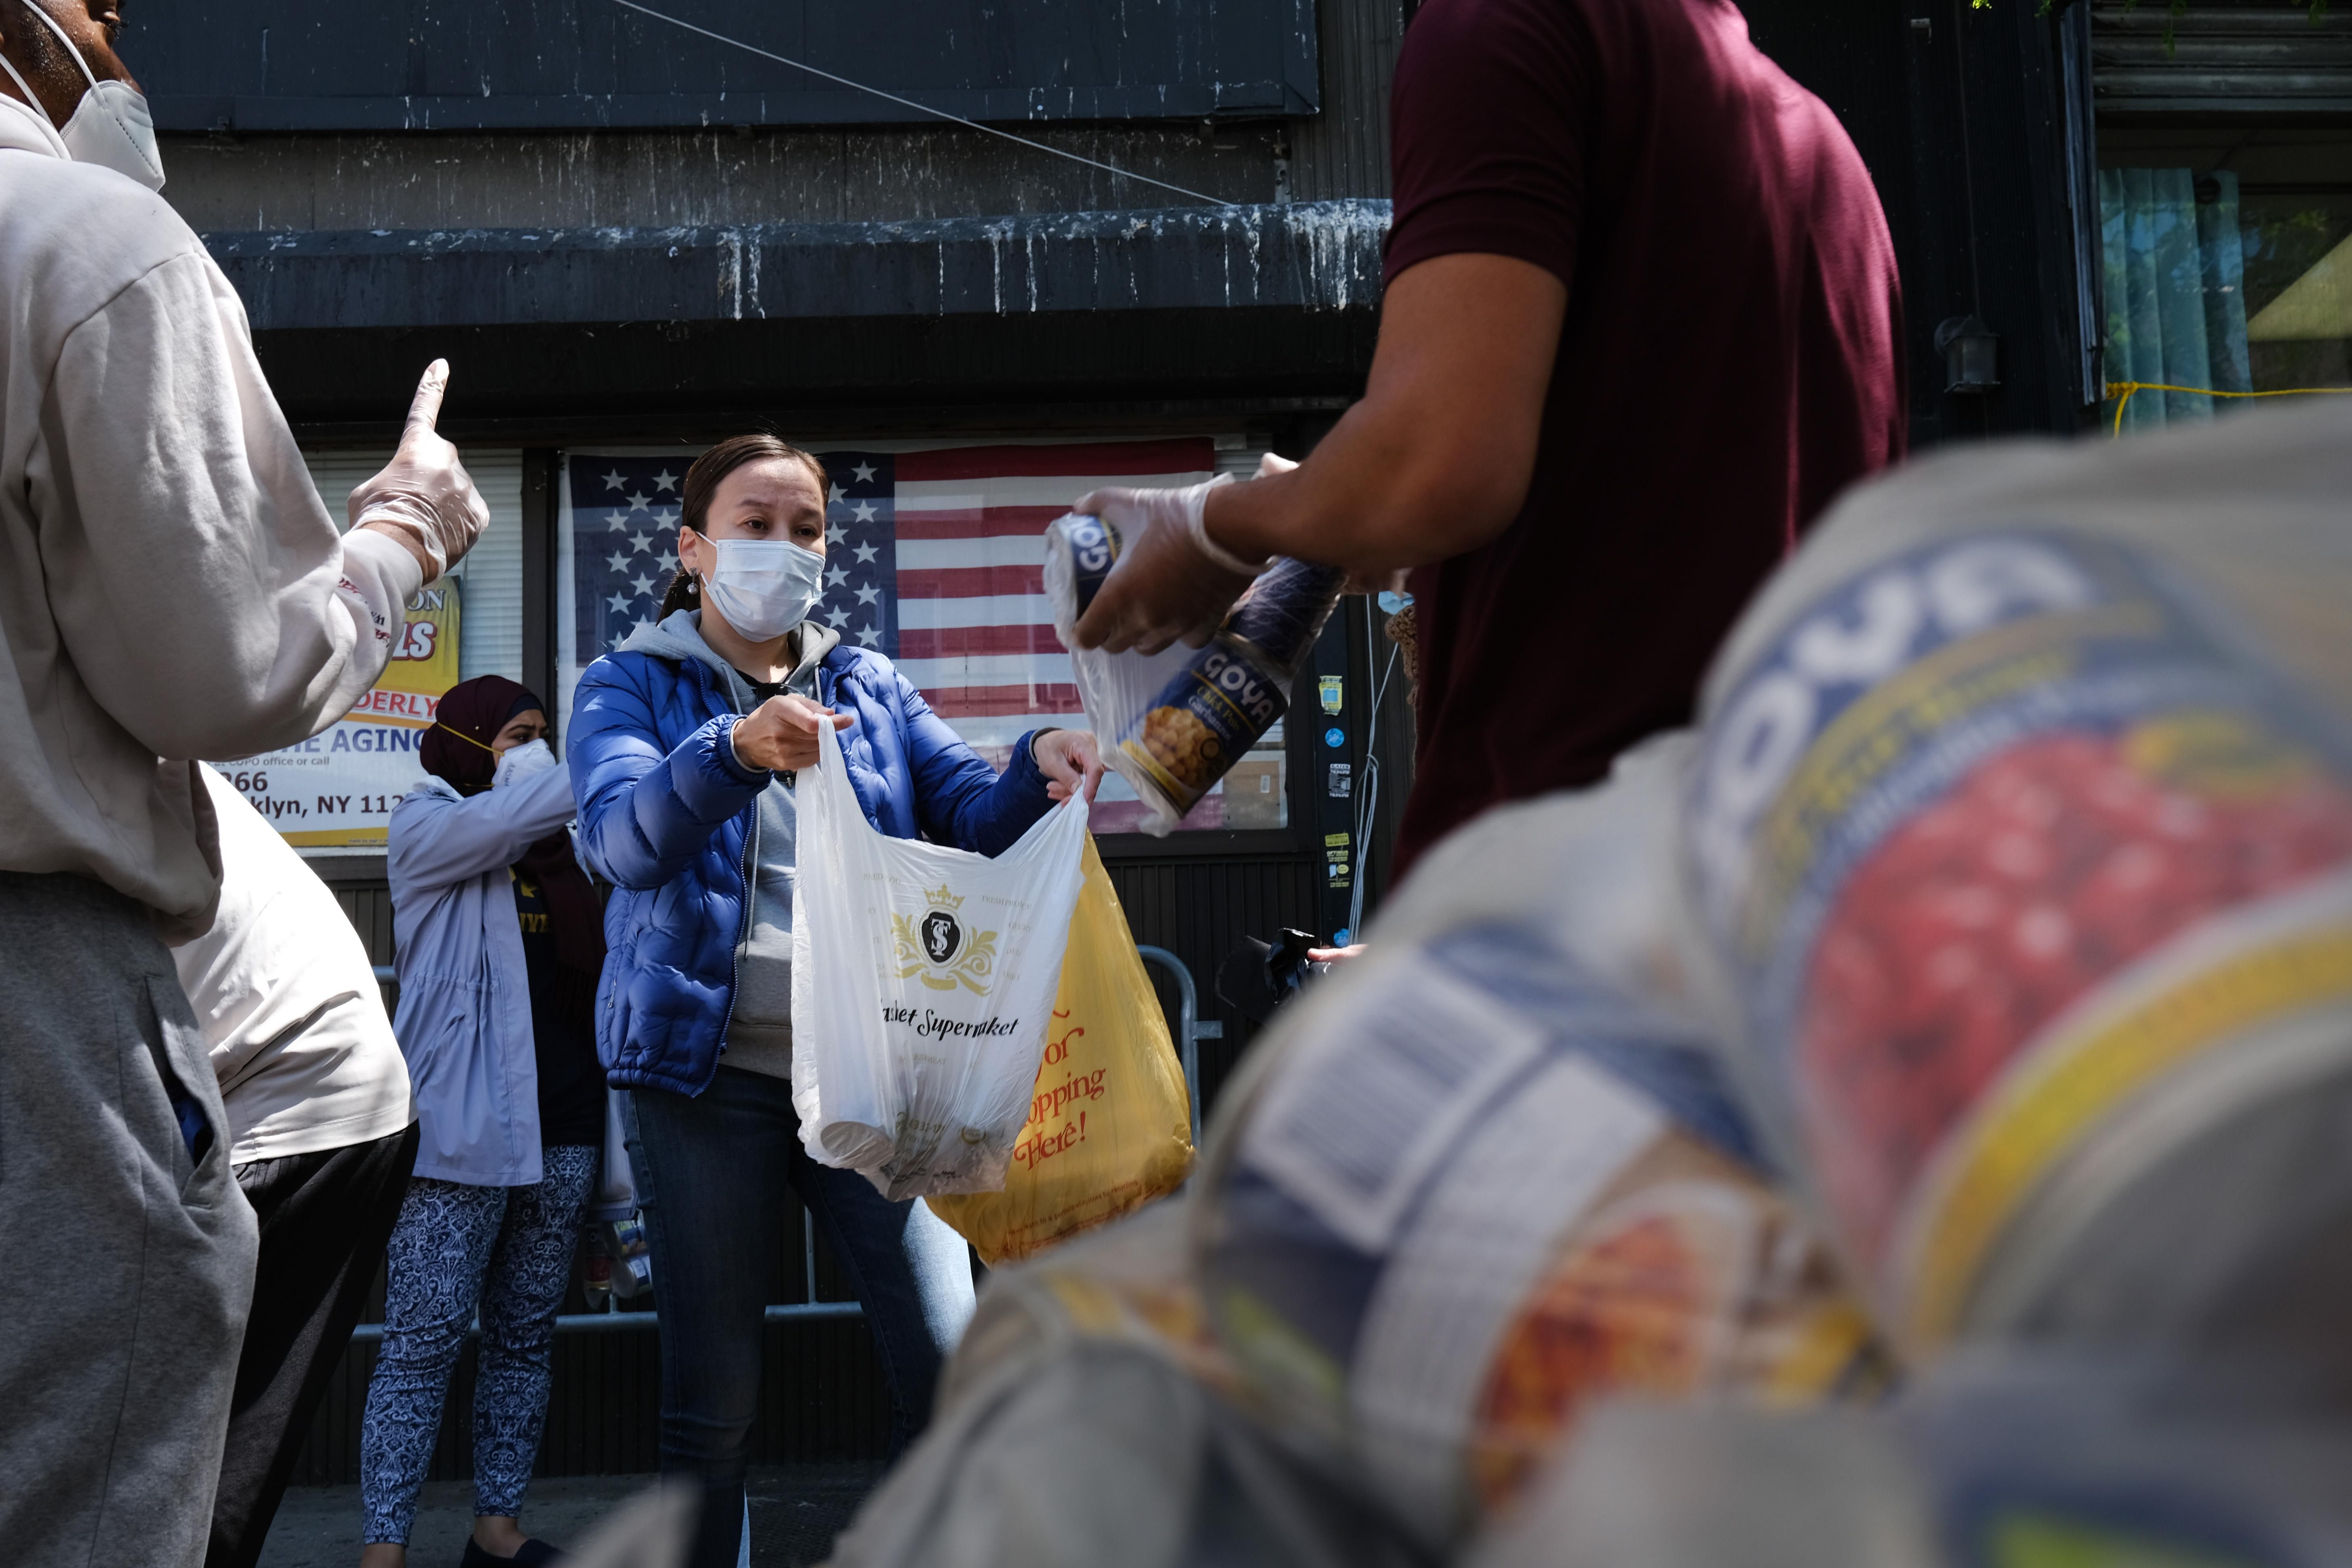 People collecting food at a food bank operation during the Covid-19 pandemic